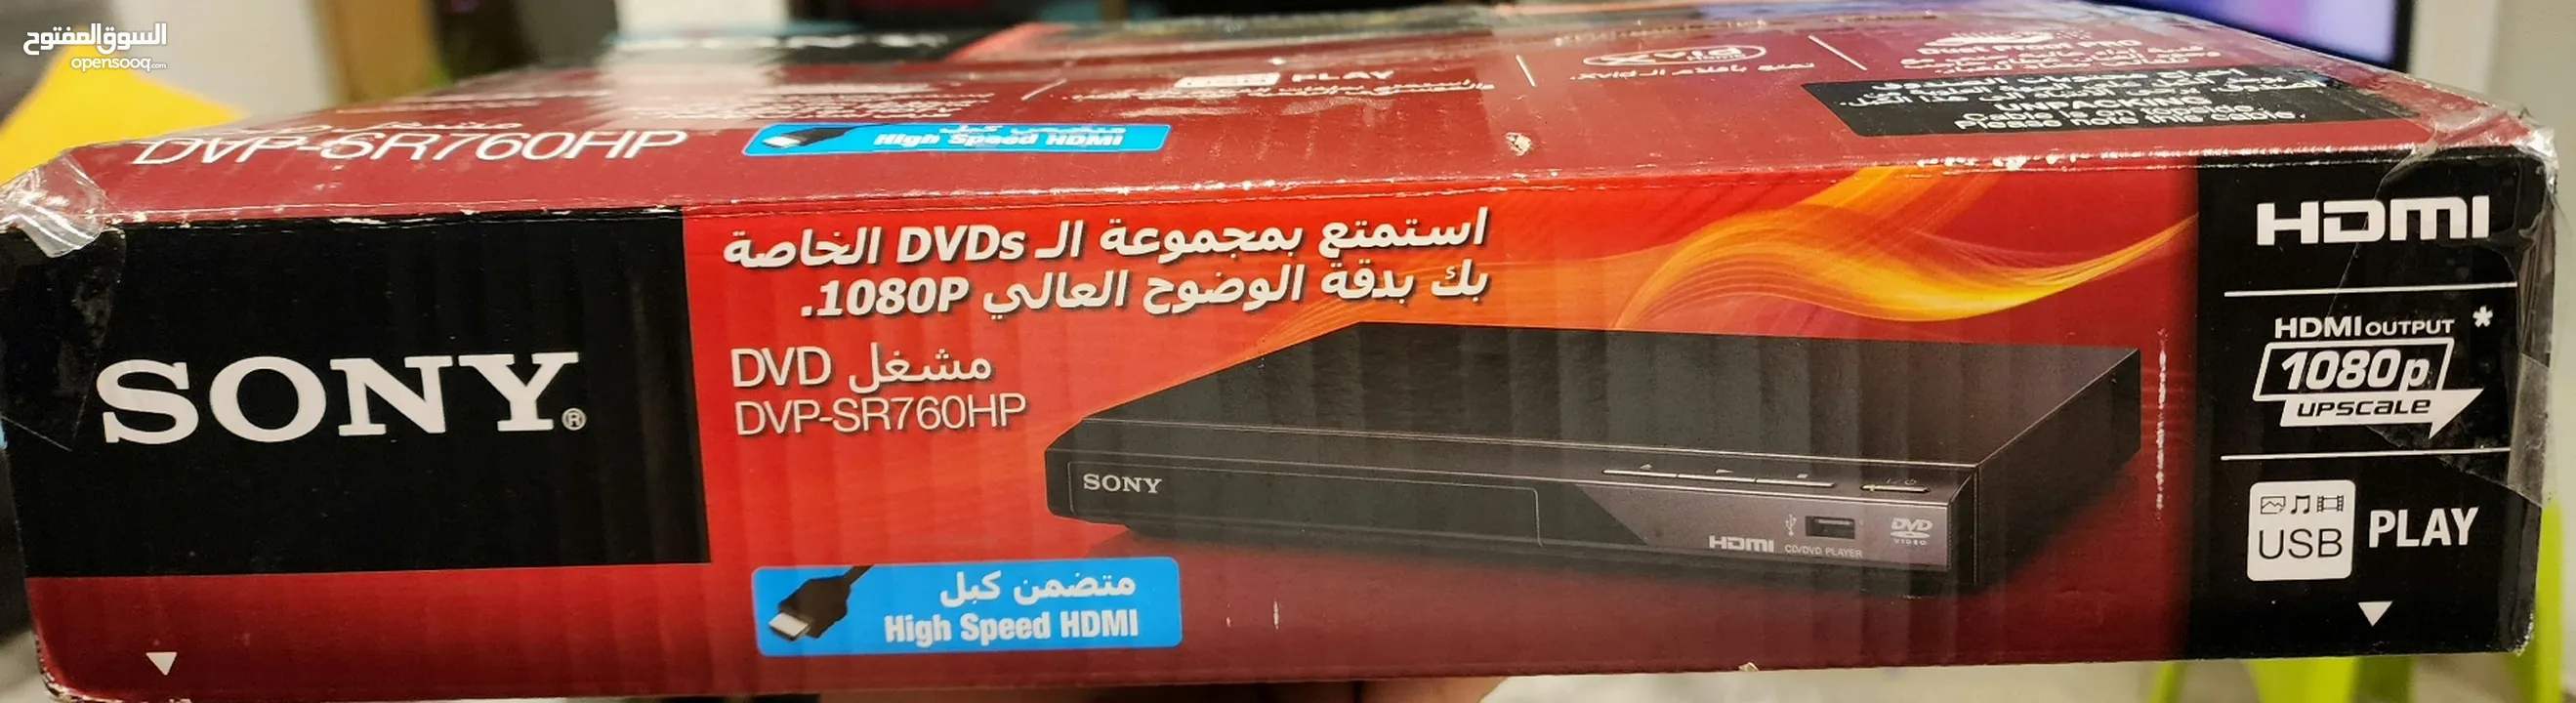 SONY DVD like new for Sale box excellent condition   price: 30$